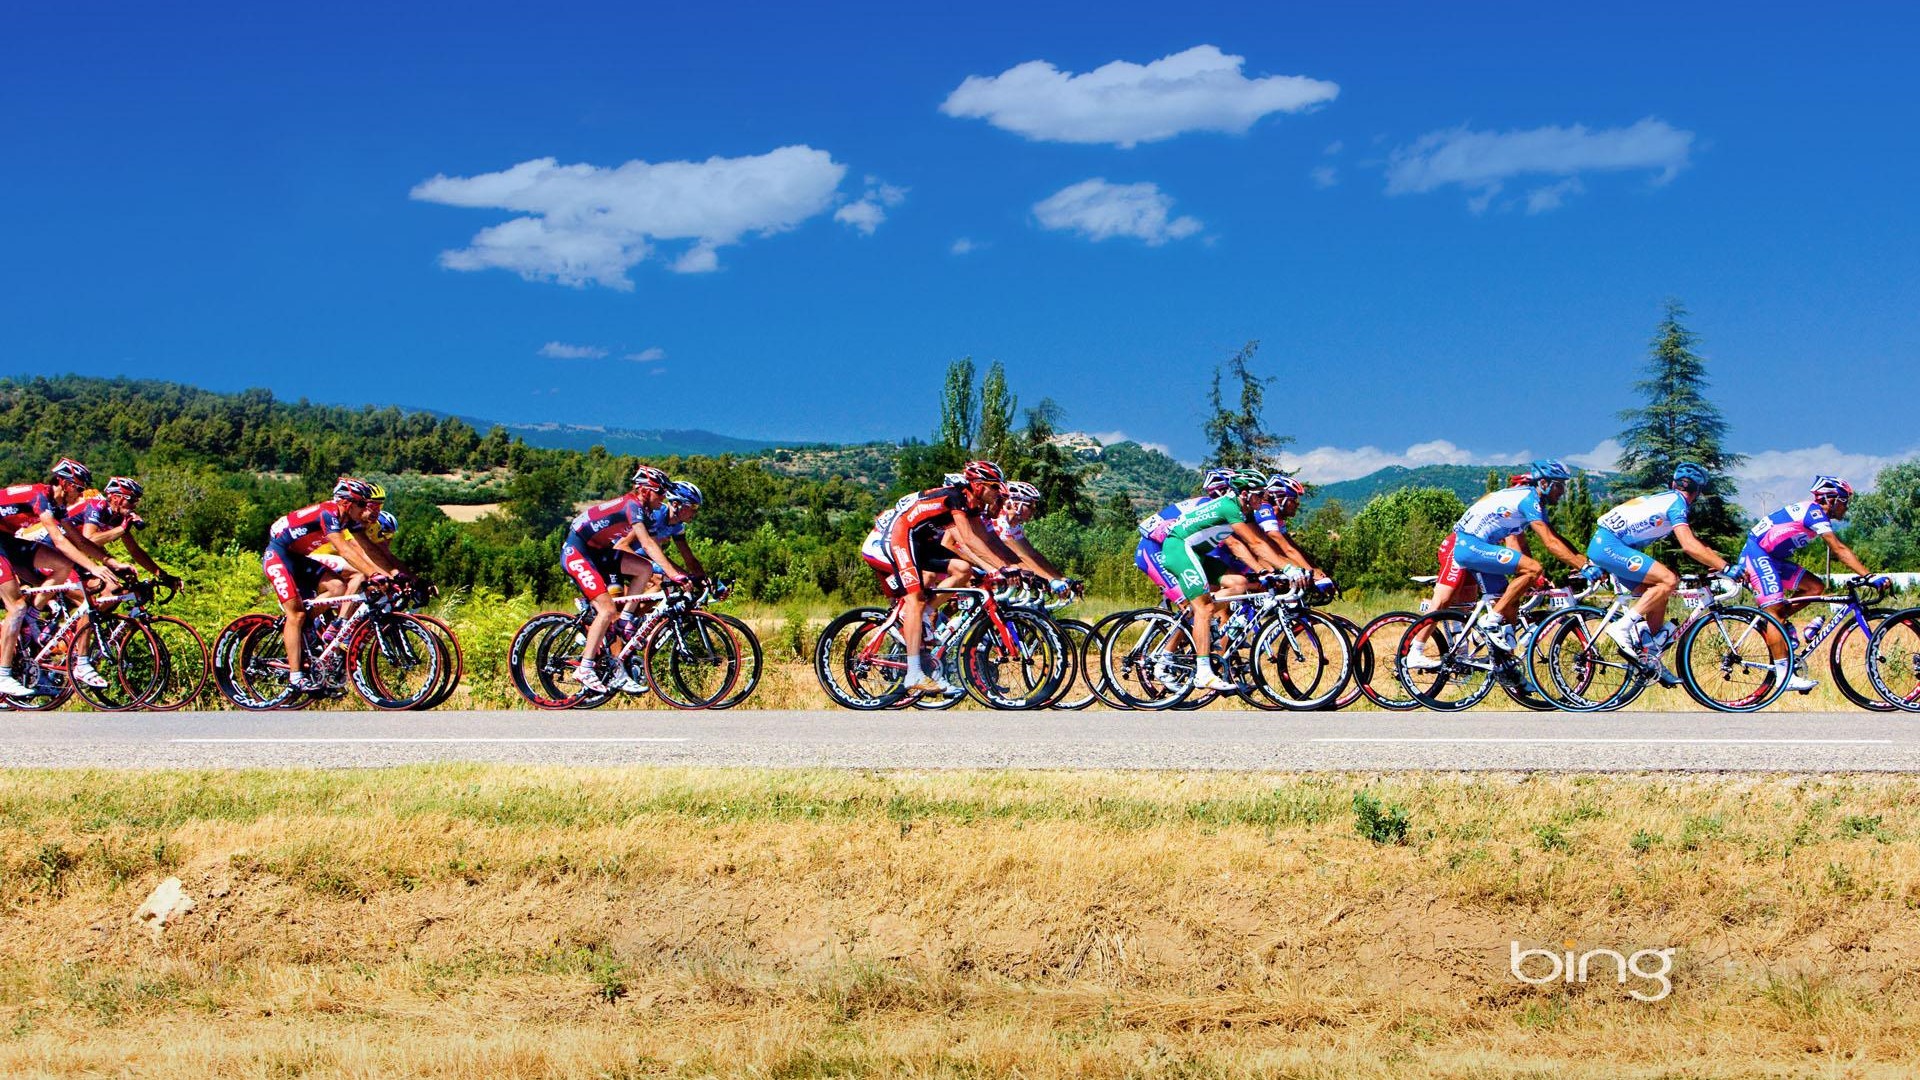 Bing Themes Cycling Race Blue Sky Widescreen Hd Wallpaper Pictures